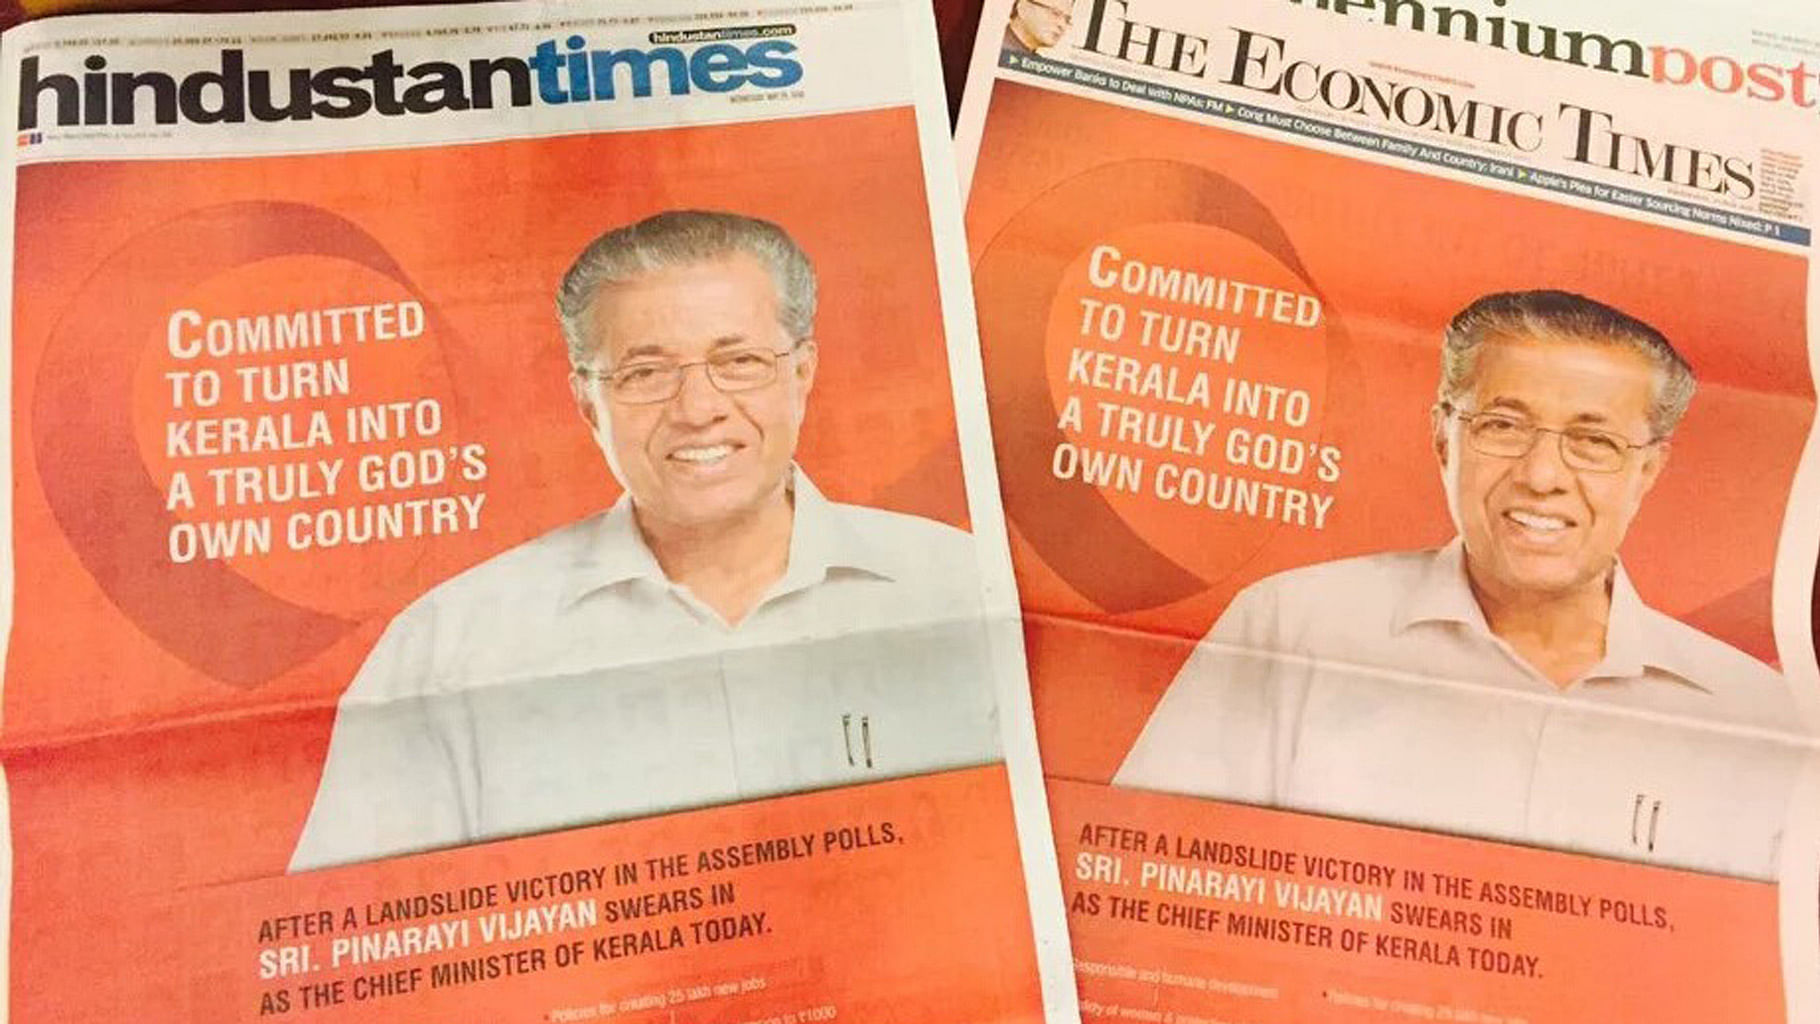 

The Left’s trademark red and Kerala’s “God’s on Country” tagline feature in ads across national dailies announcing Pinarayi Vijayan’s swearing in as Kerala’s next Chief Minister. (Photo Courtesy: <i>The News Minute</i>)